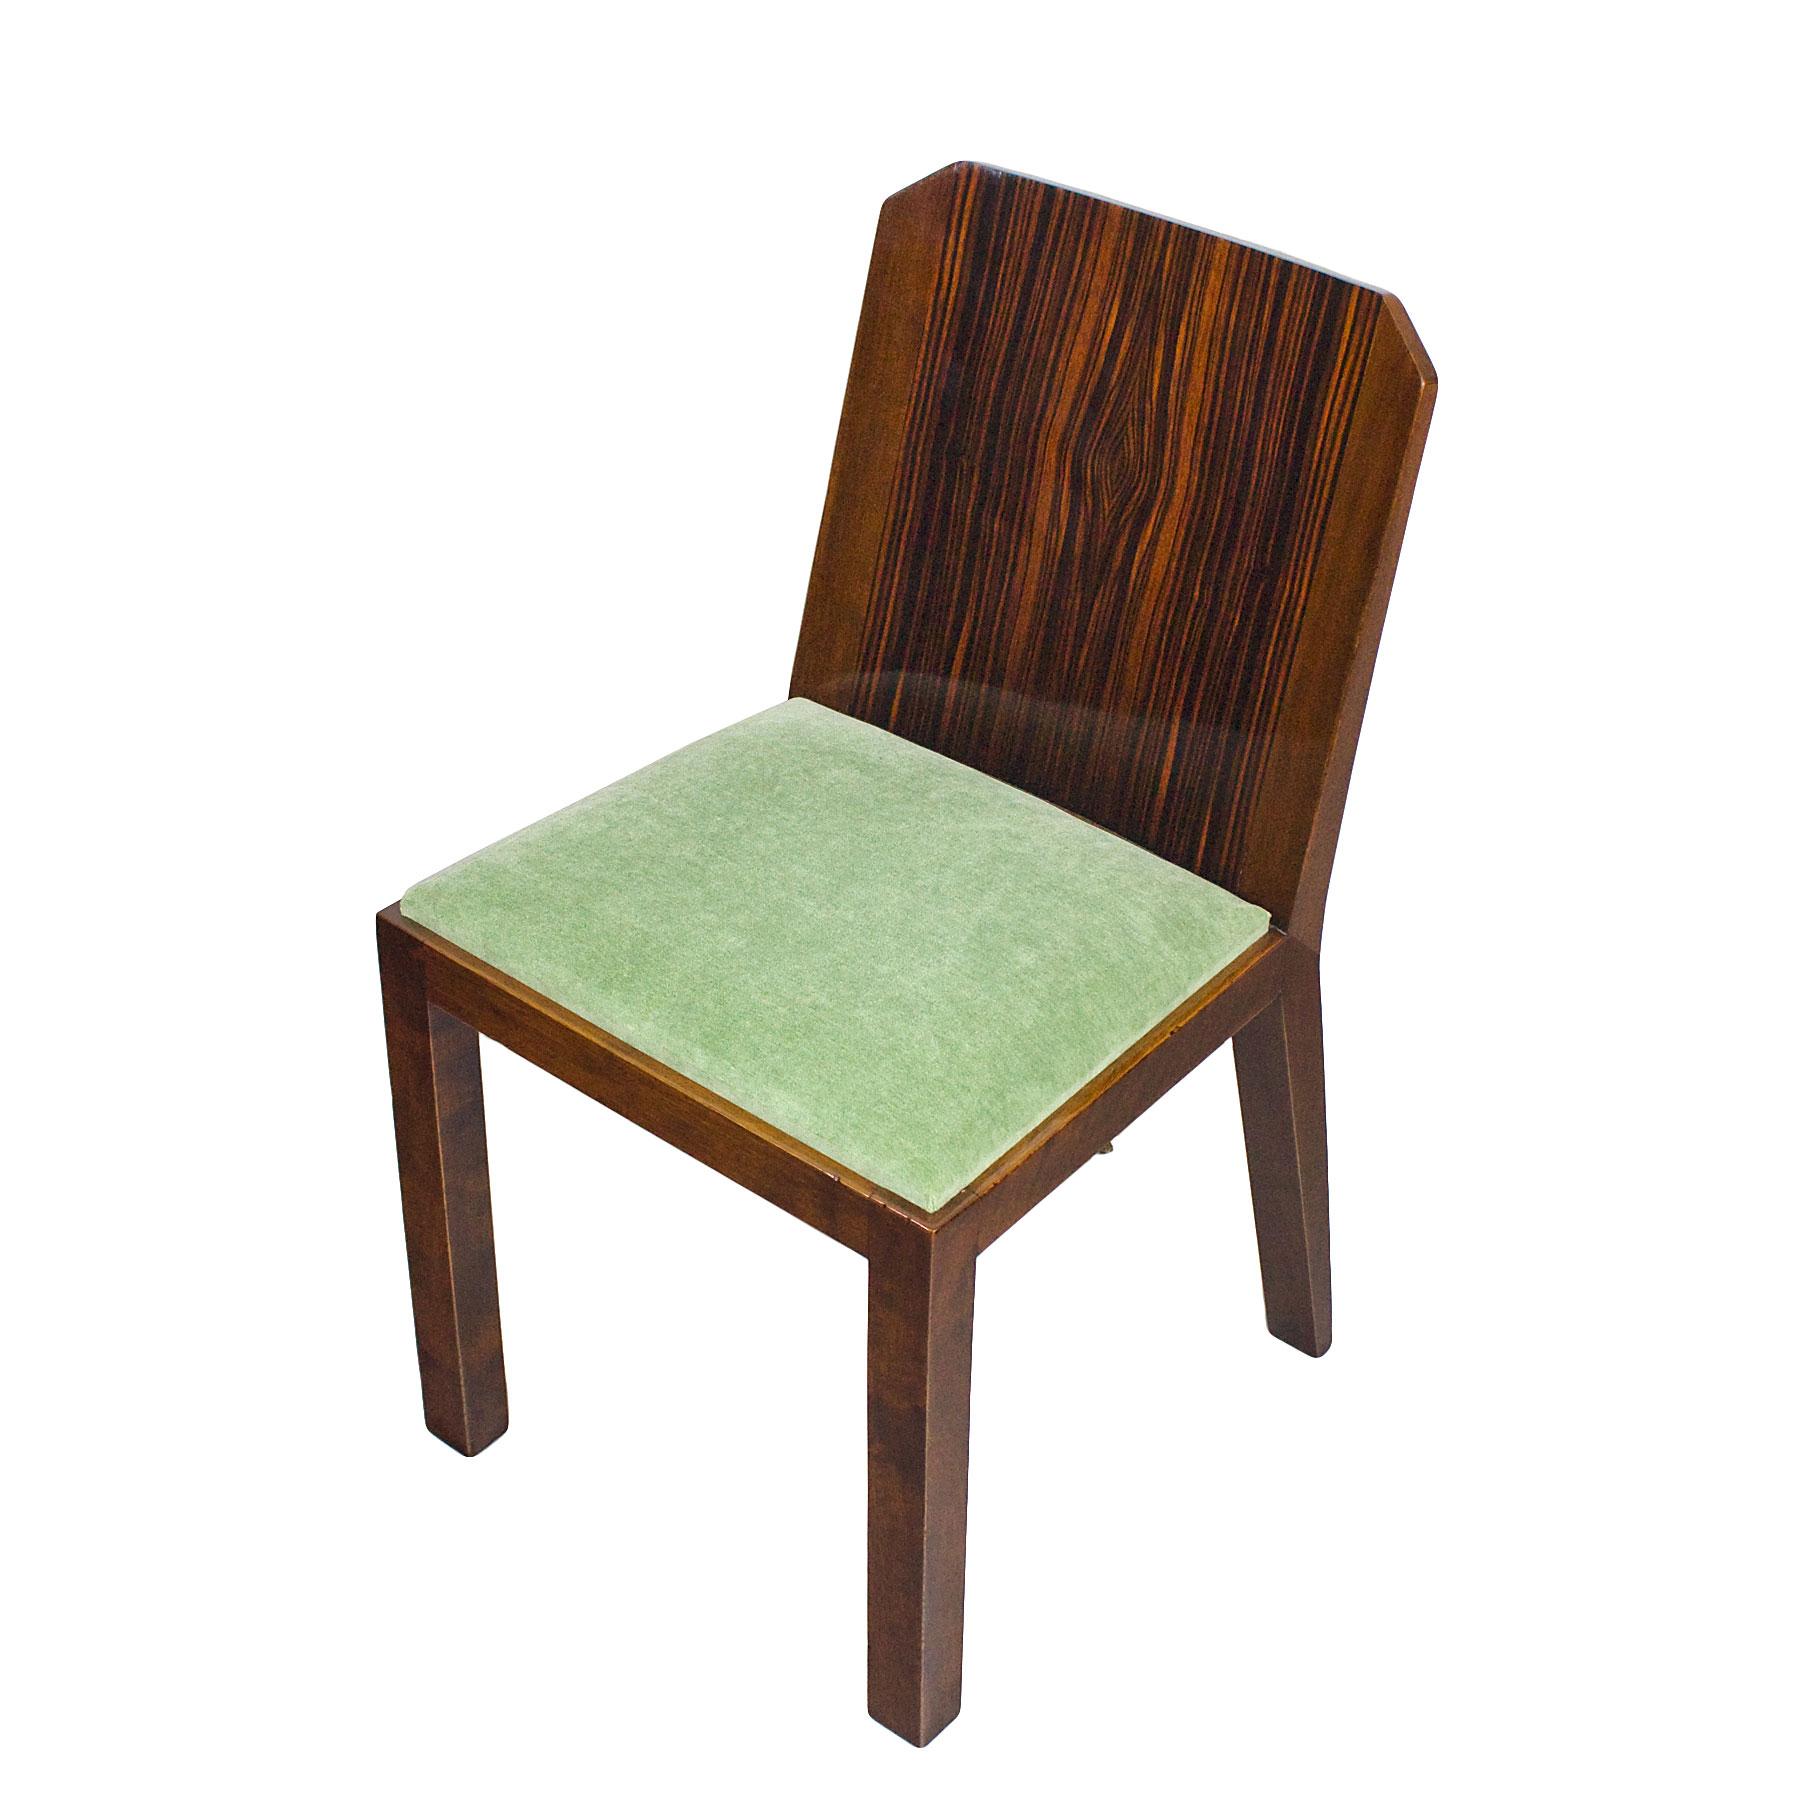 French Set of Six Art Deco Chairs in Walnut, Macassar Veneer and Velvet - France, 1930s For Sale